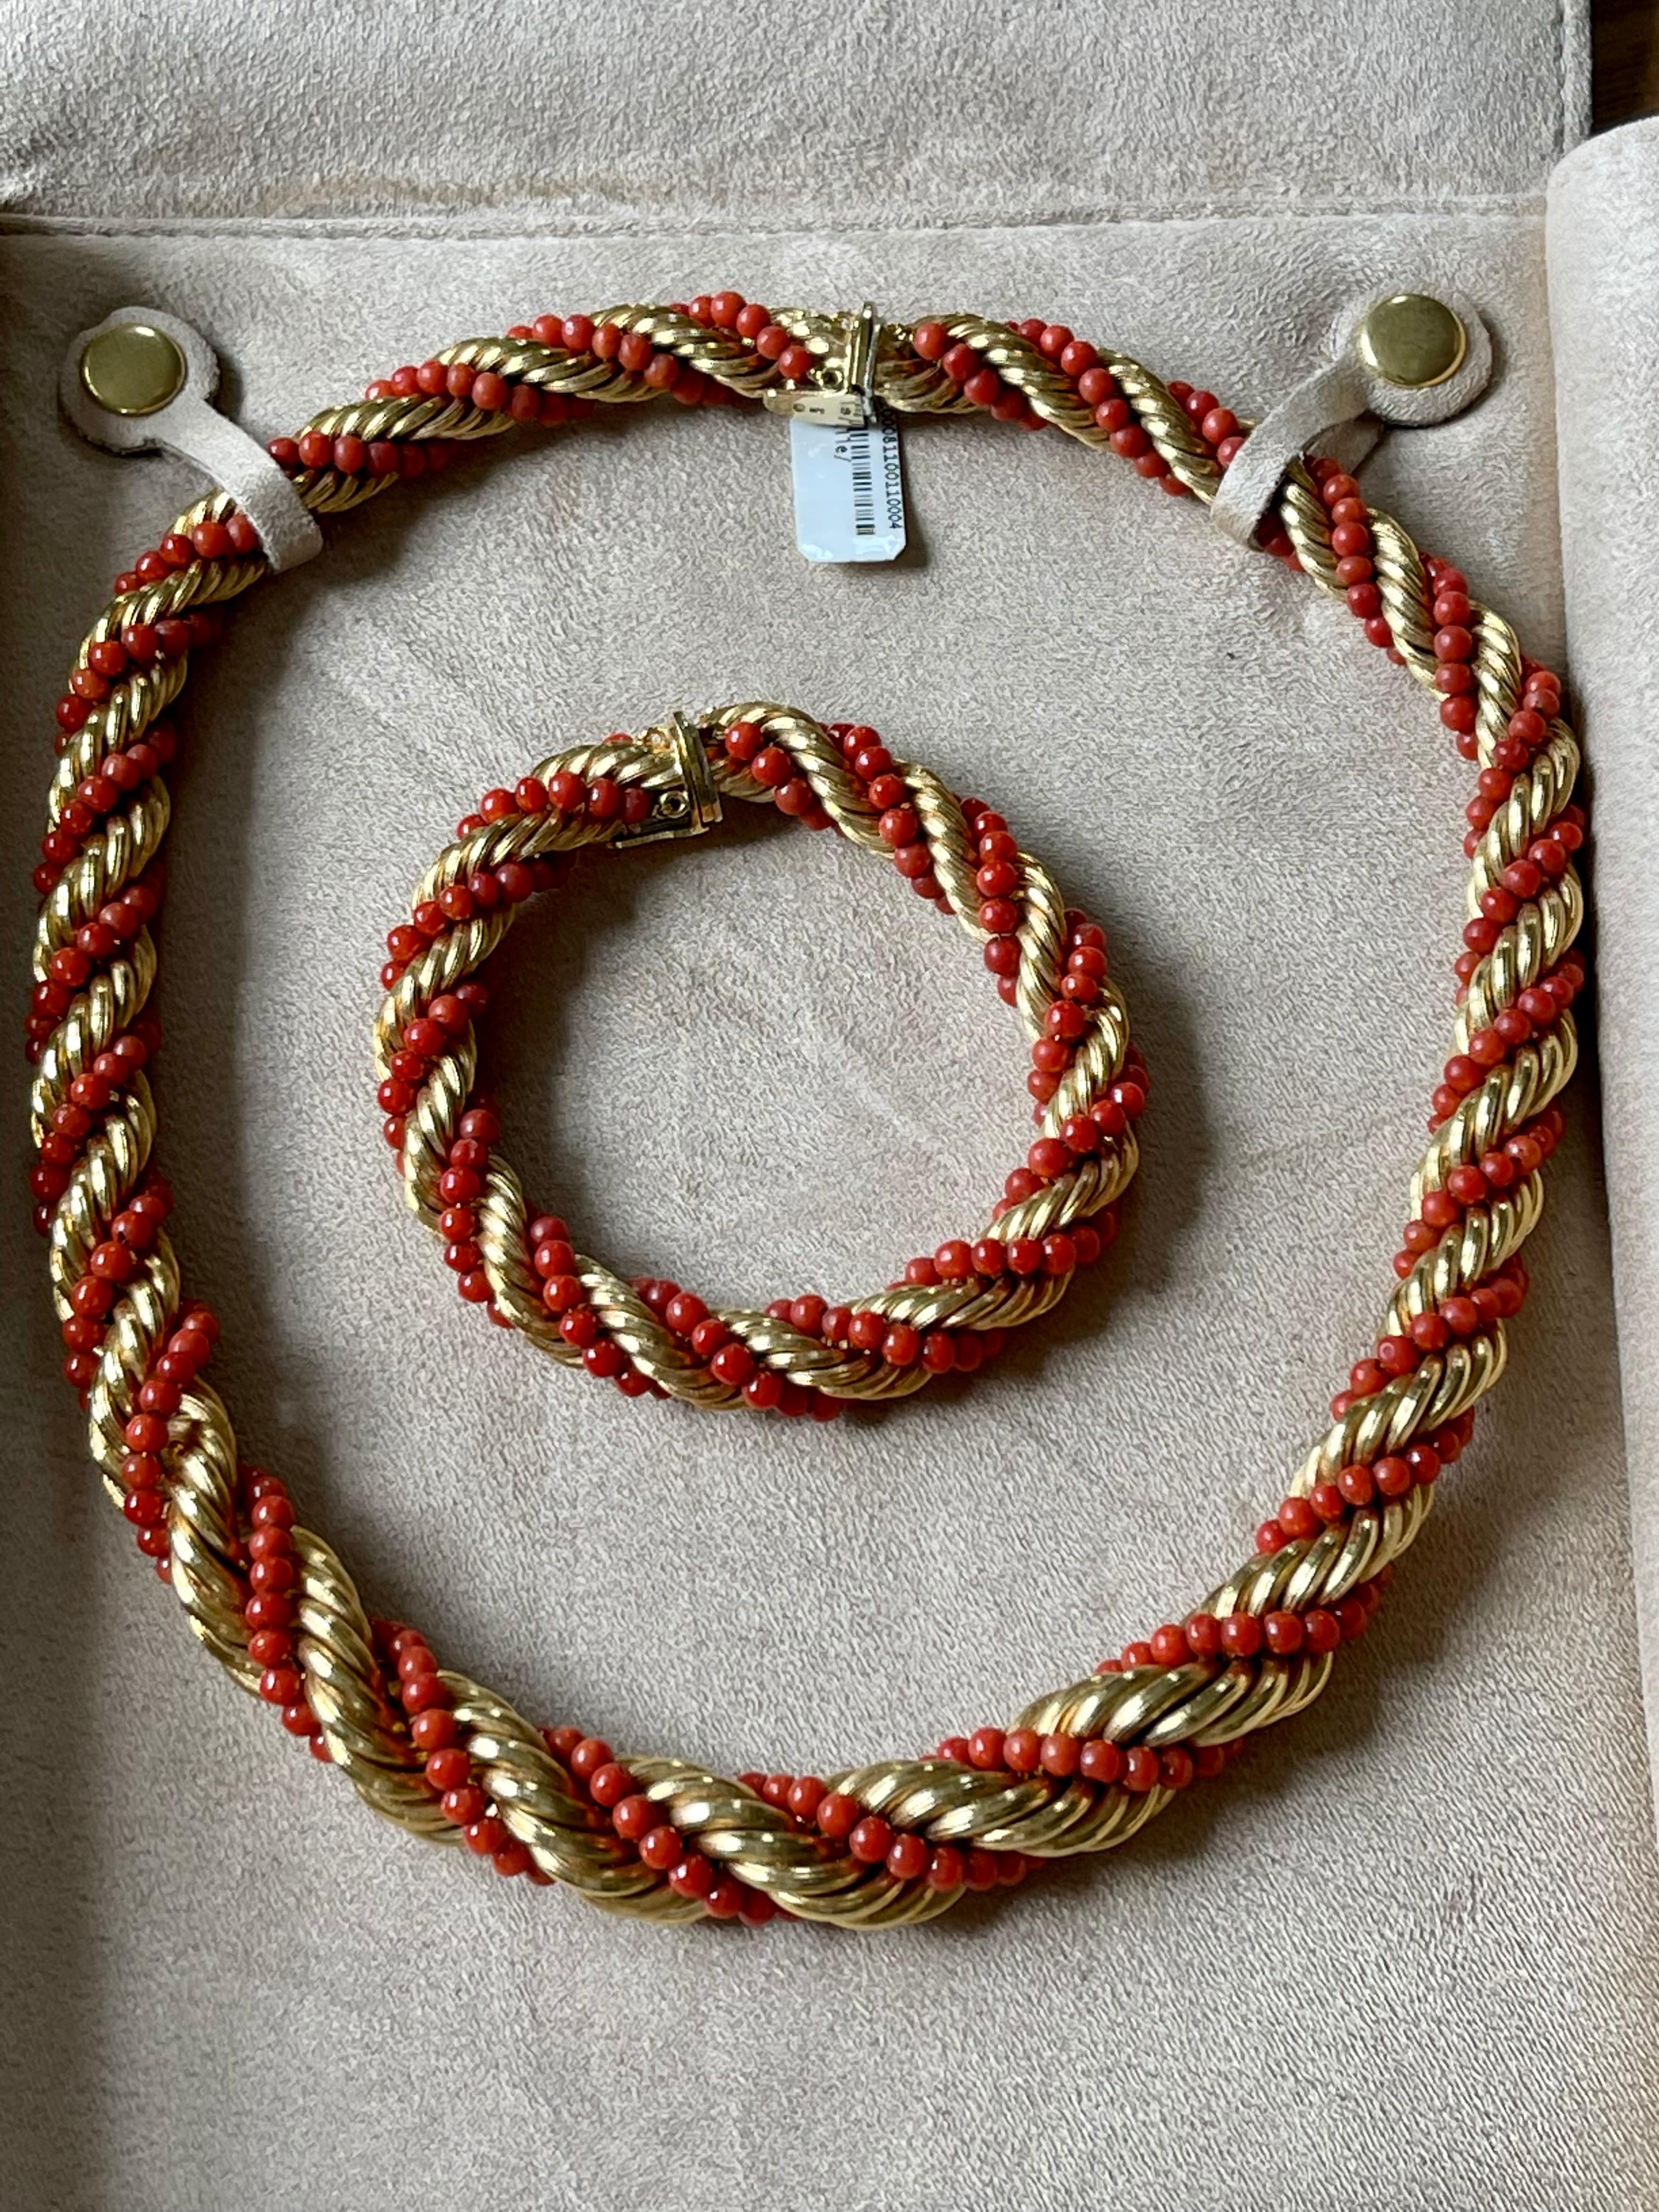 Rare 18 K yellow Gold Torsade featuring a twisted gold chain and deep red coral bead necklace. It can be worn at two different lengths, 43 cm and 61 cm, or the extension part can be also worn as a bracelet (length 18 cm). 
Masterfully handcrafted